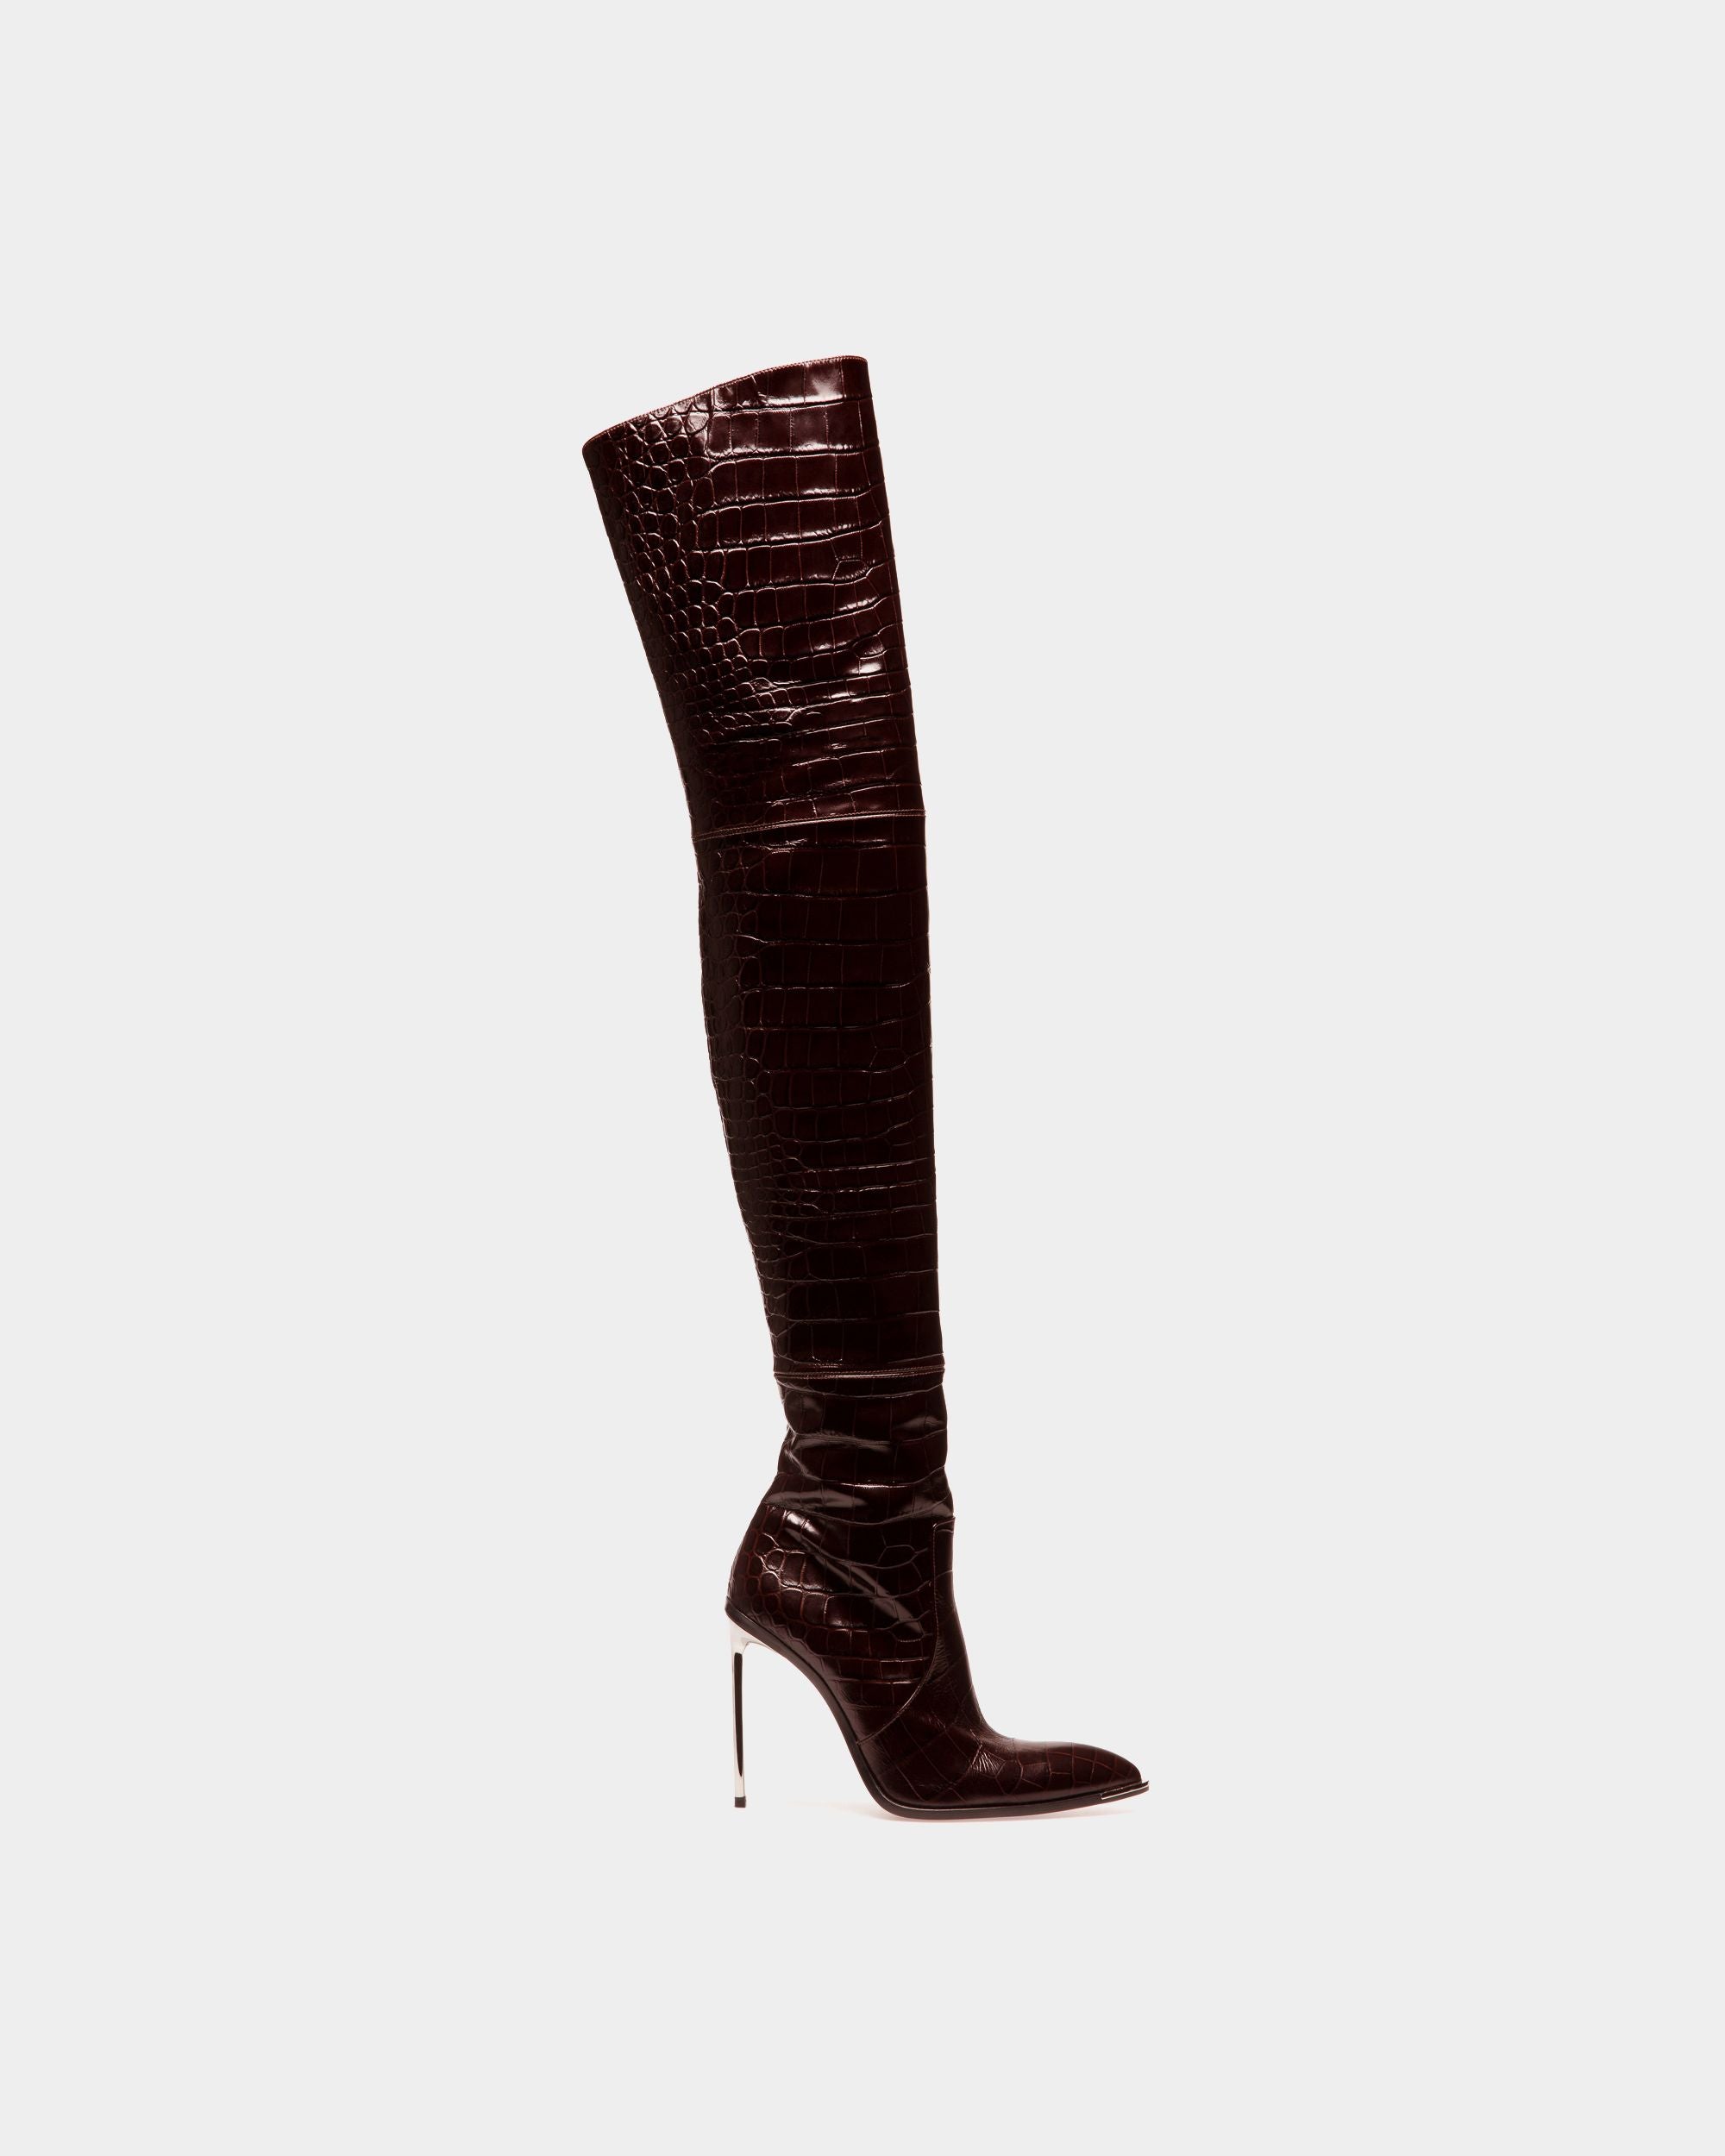 Hedy Long Boots | Women's Long Boots | Black Leather | Bally | Still Life Side